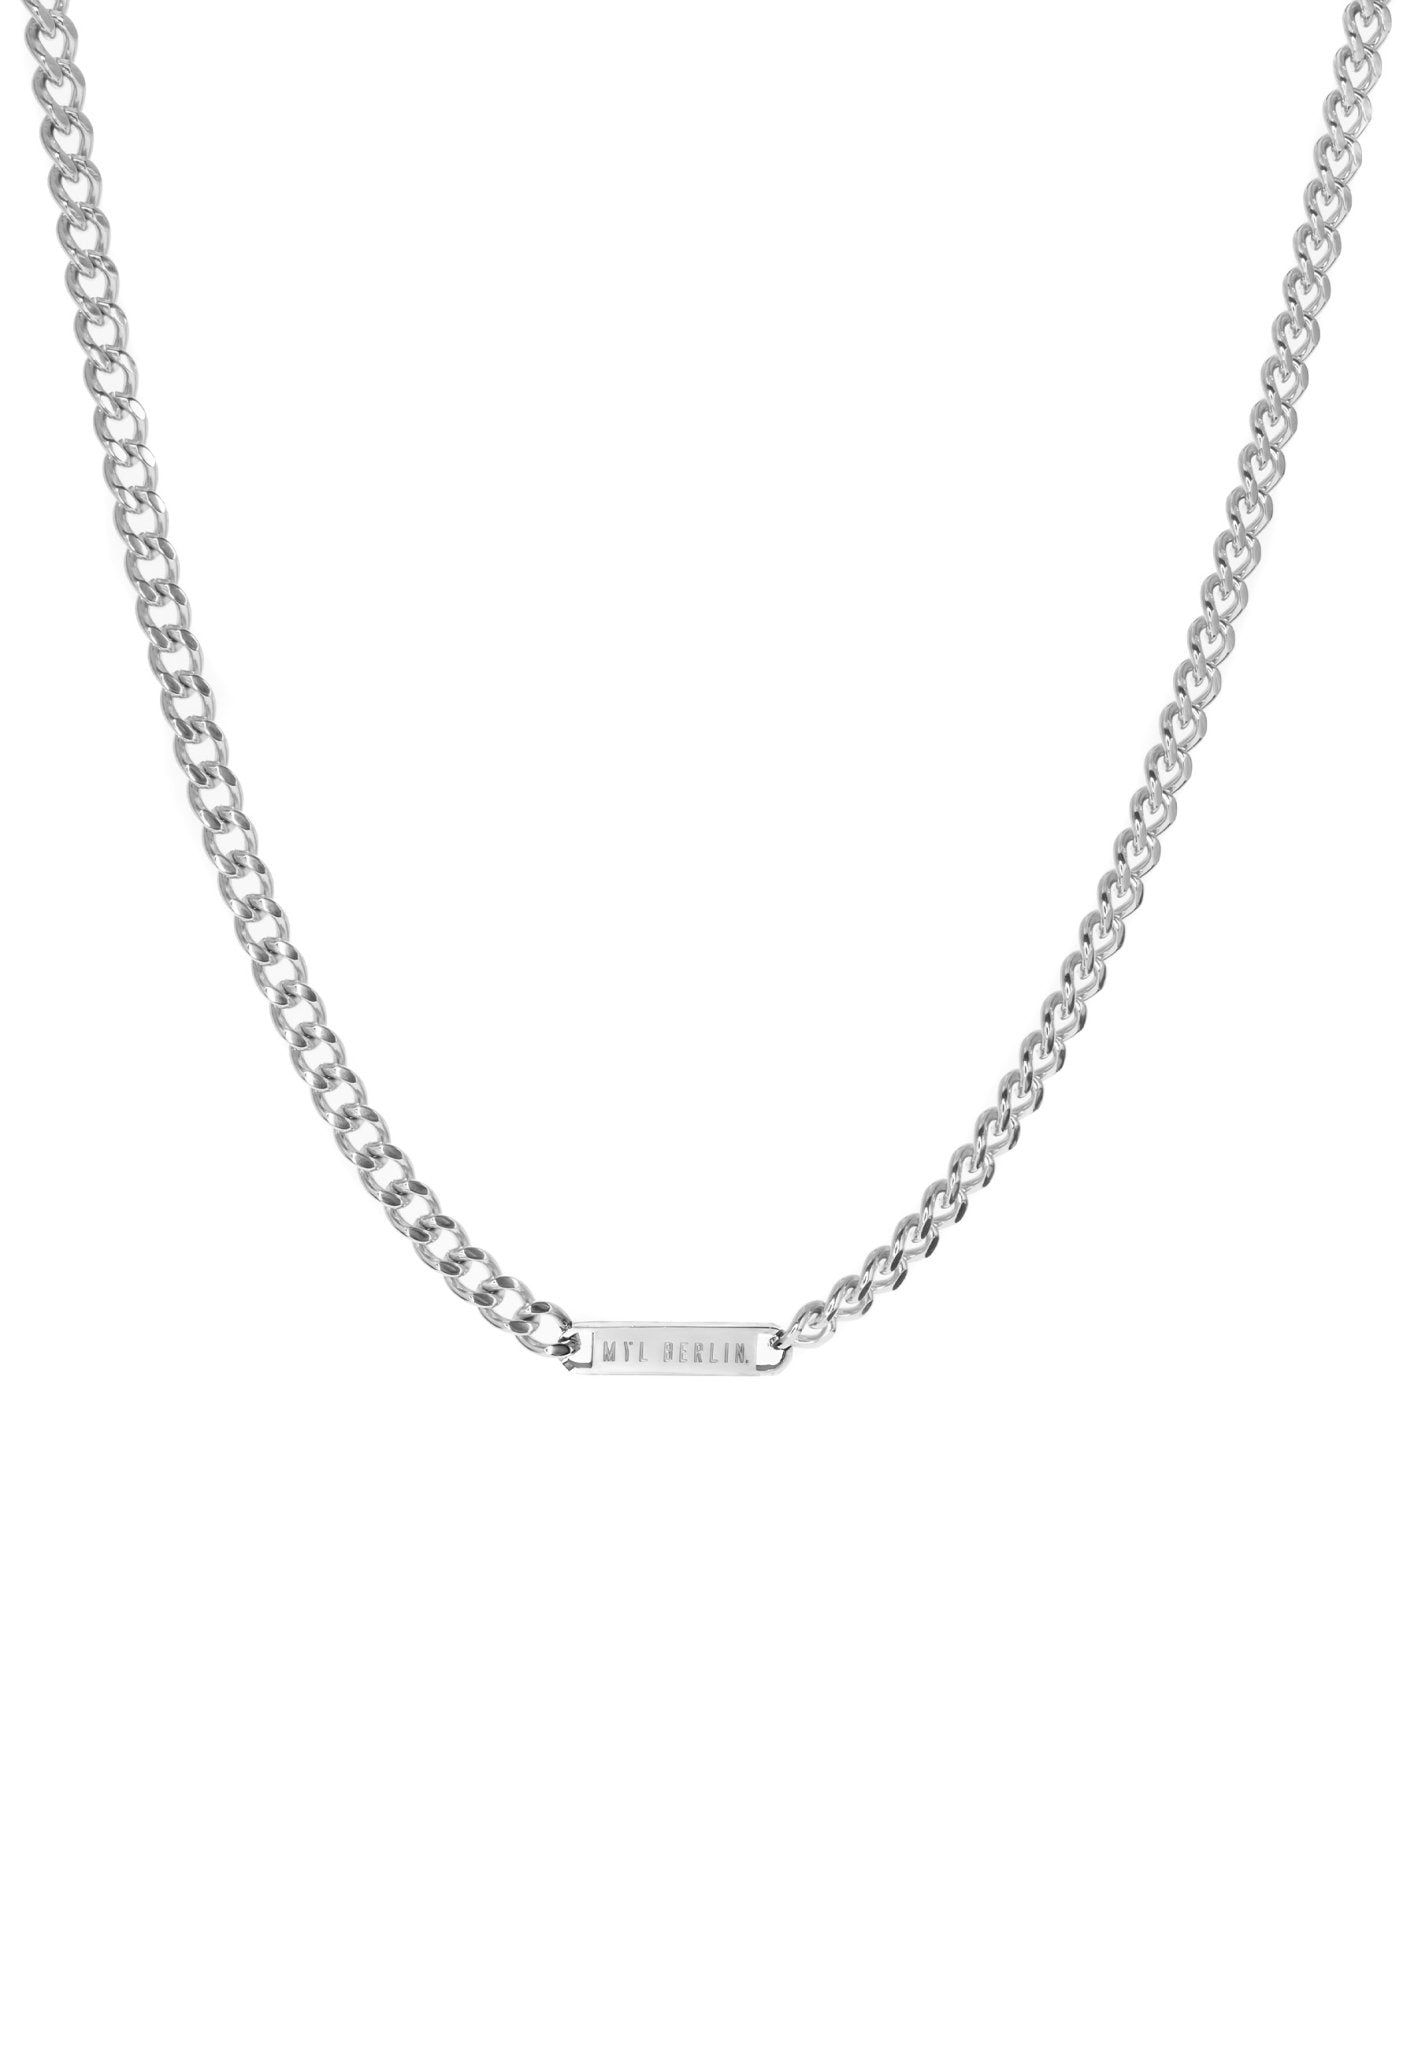 Thick Curb Chain Necklace "Berlin" - MYL BERLIN - 4260654113303 - 4260654113303